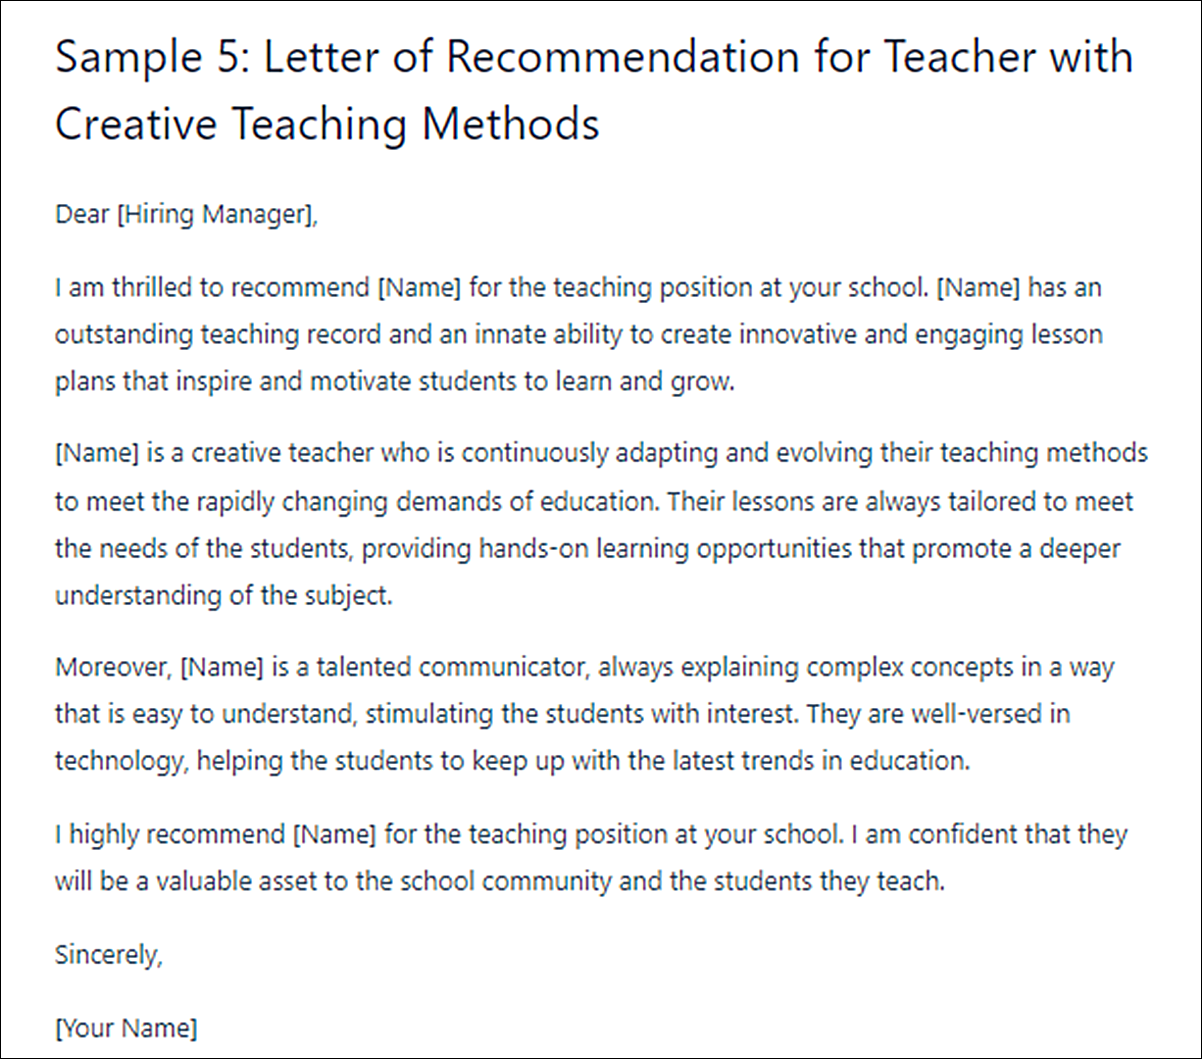 Letter of Recommendation Templates for Employment as a Teacher